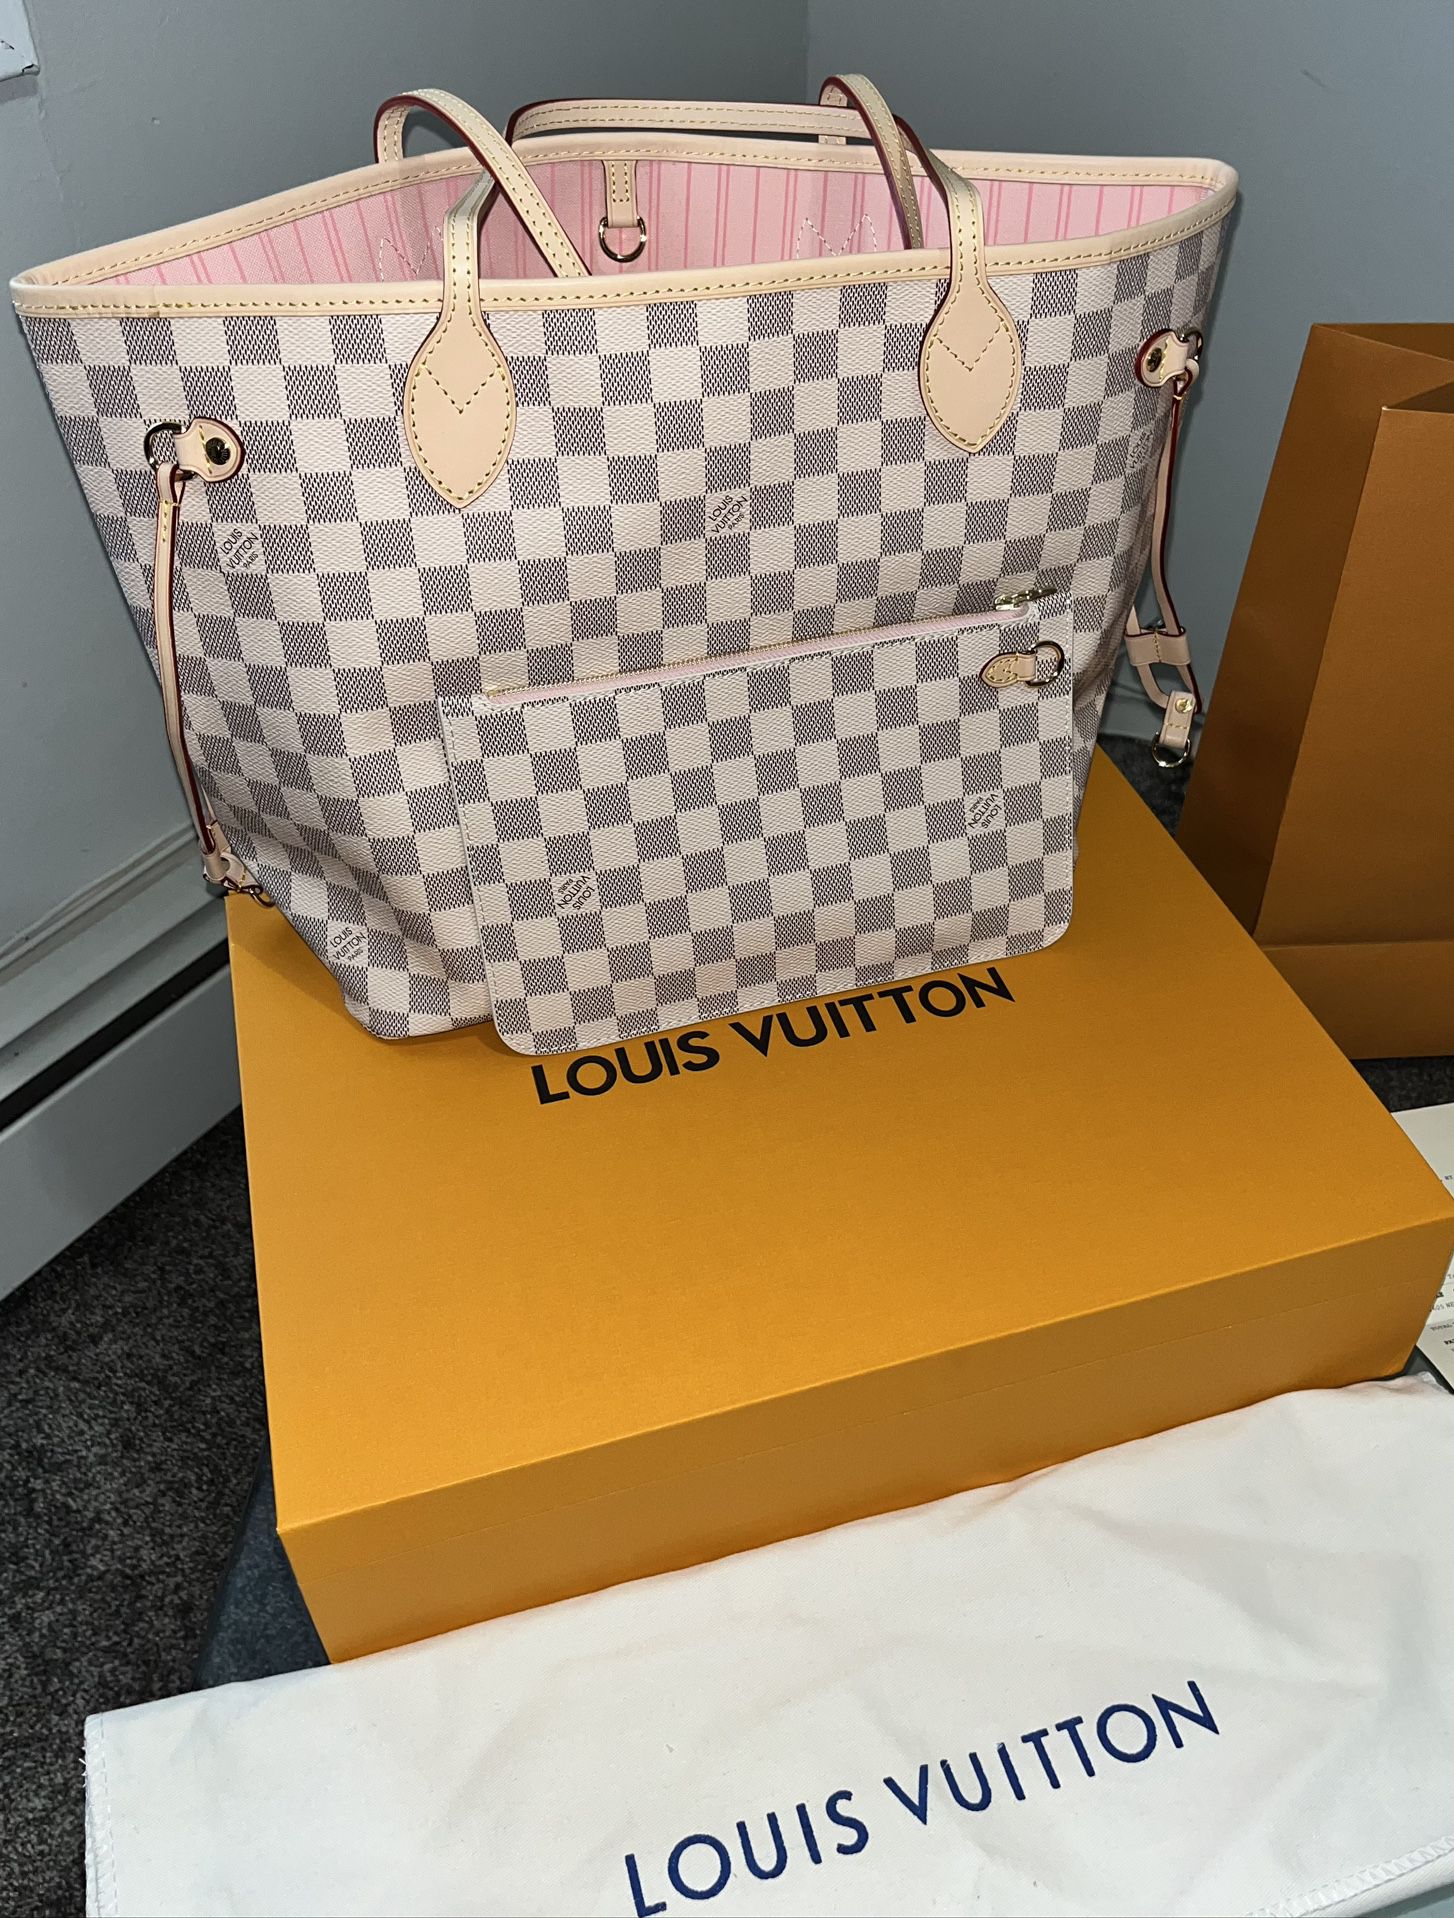 New Authentic Louis Vuitton Monogram Beige Interior Neverfull MM Handbag  for Sale in Valley Stream, NY - OfferUp